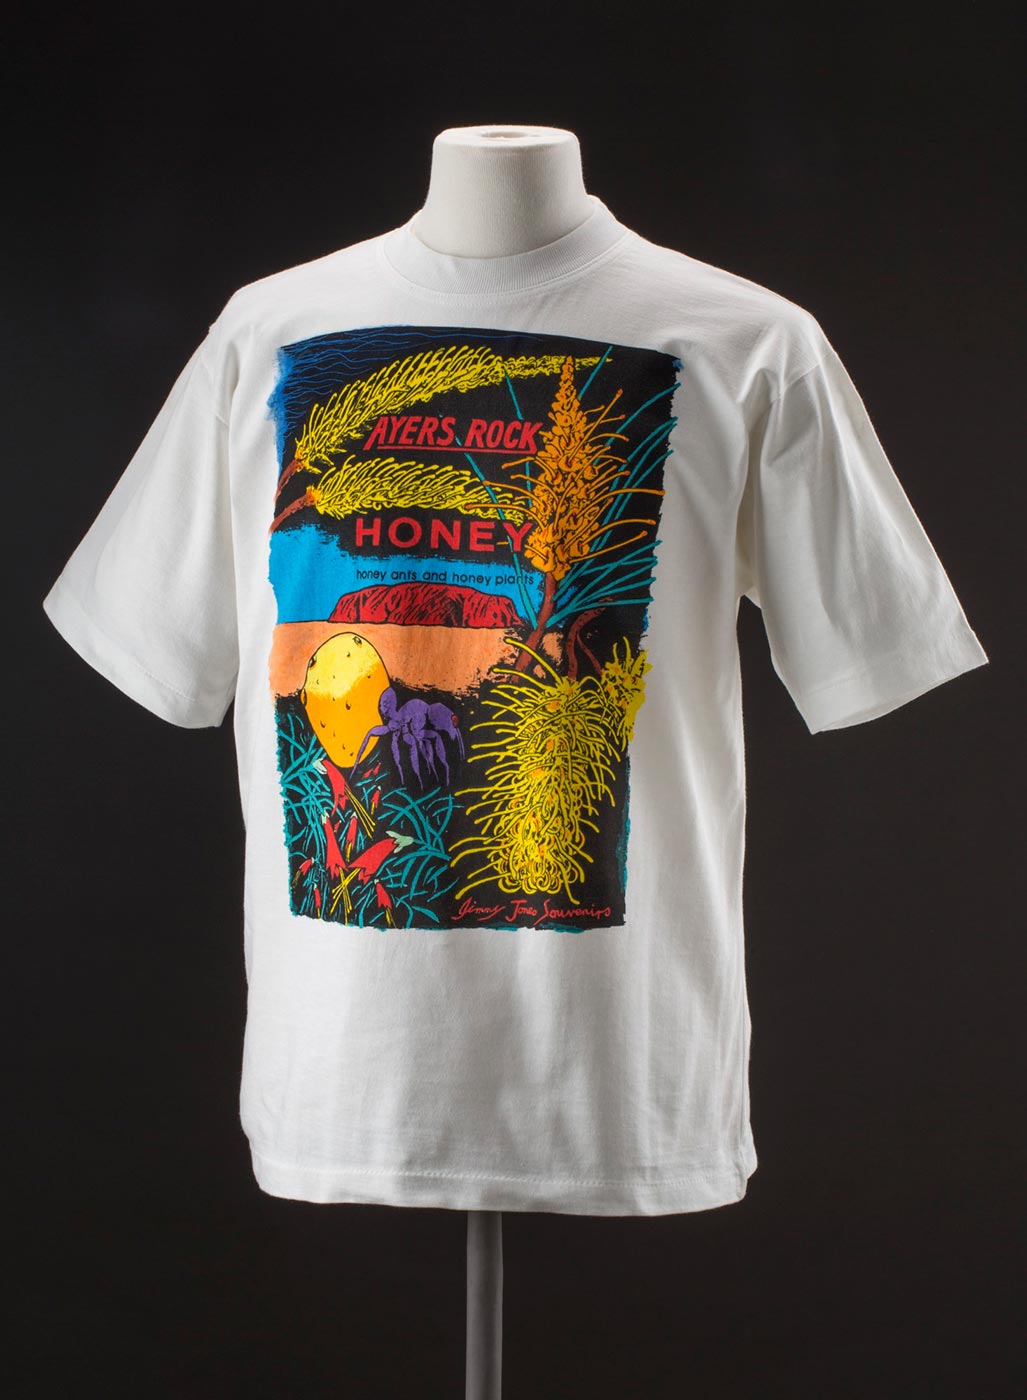 Depicted on the T-shirt is a brightly coloured landscape featuring native flowers and honey ant in foreground, Uluru / Ayers Rock in background and text above 